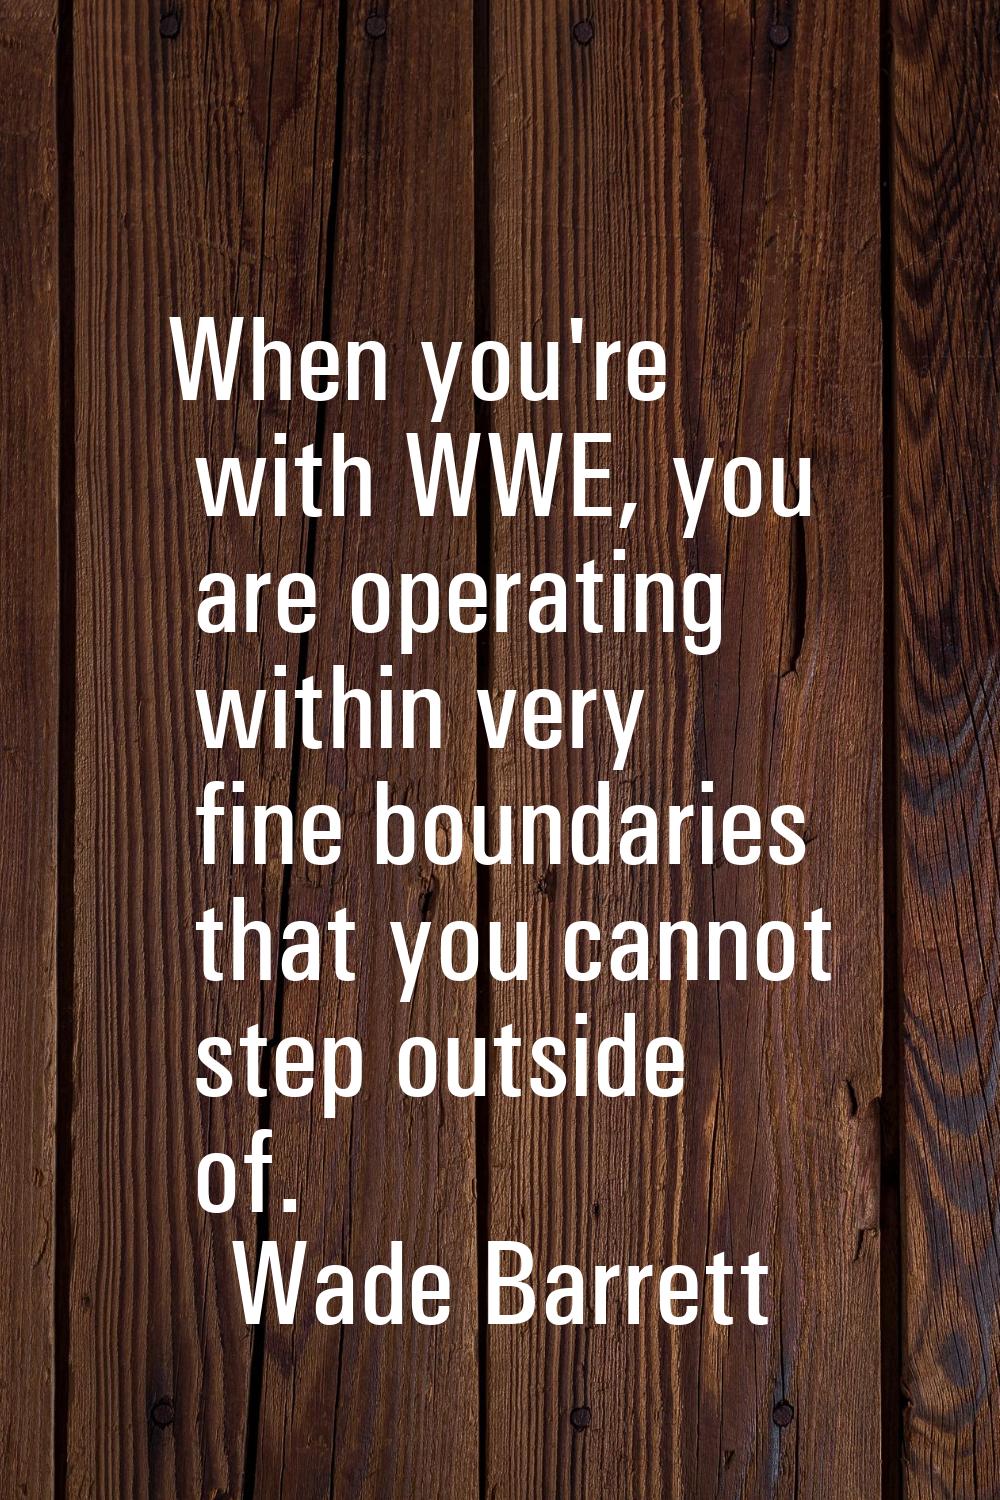 When you're with WWE, you are operating within very fine boundaries that you cannot step outside of